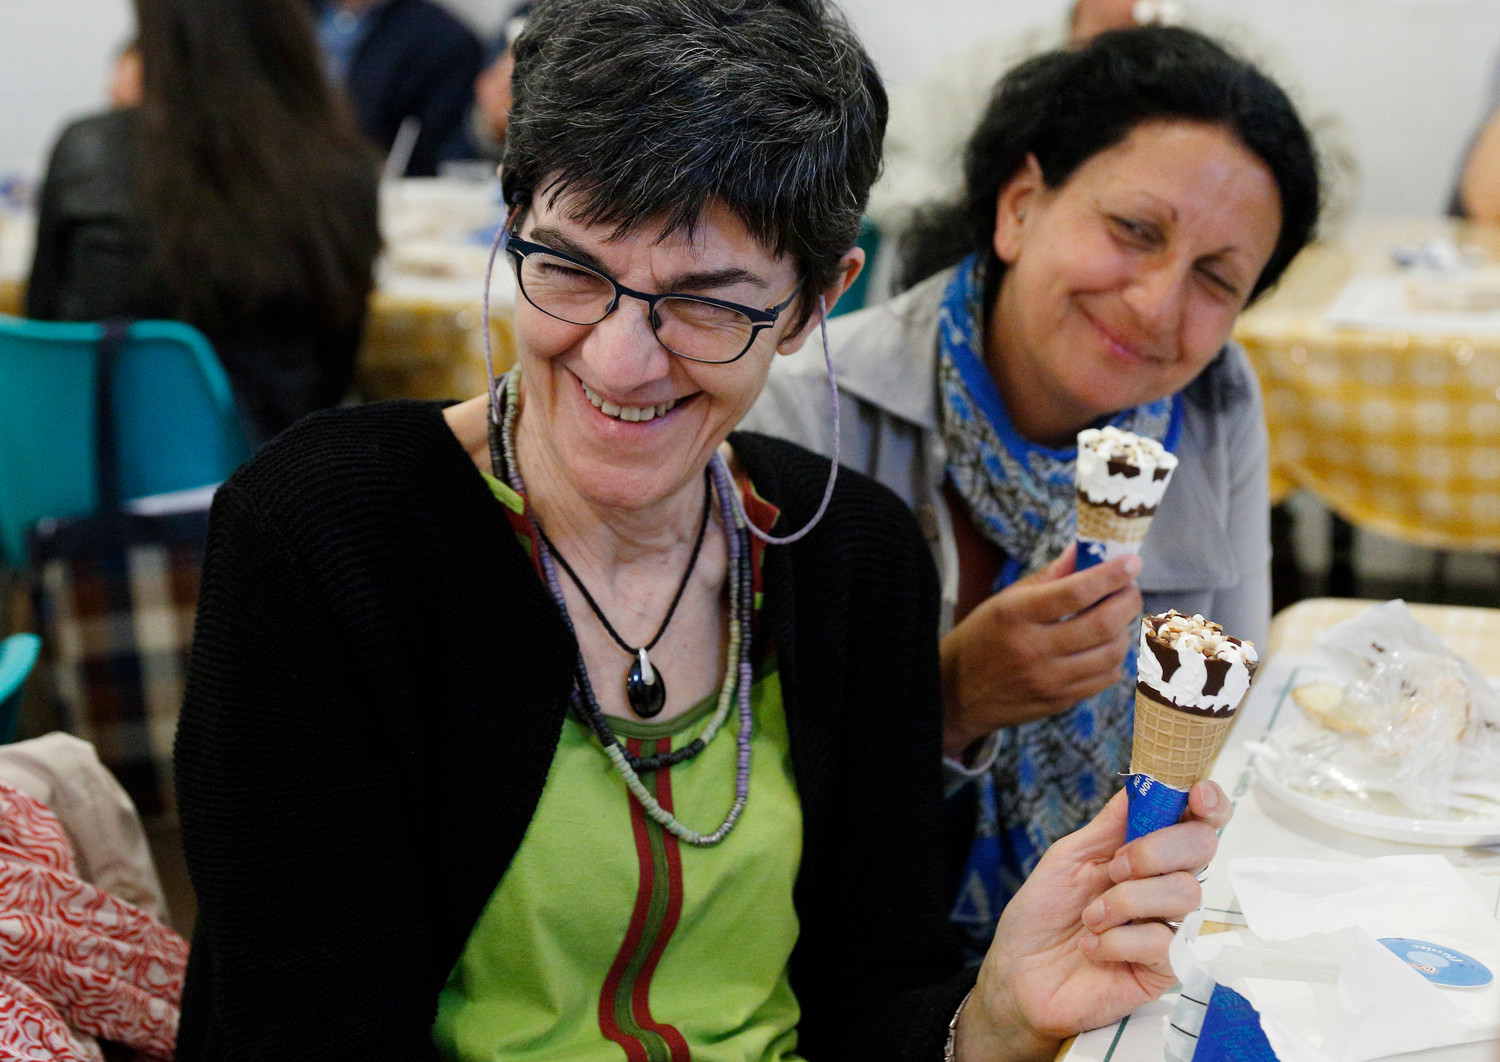 People eat ice cream cones donated by Pope Francis at a Sant’Egidio soup kitchen in Rome April 23. In honor of his name day, the feast of St. George, the Pope donated 3,000 servings of ice cream to soup kitchens and homeless shelters around Rome.